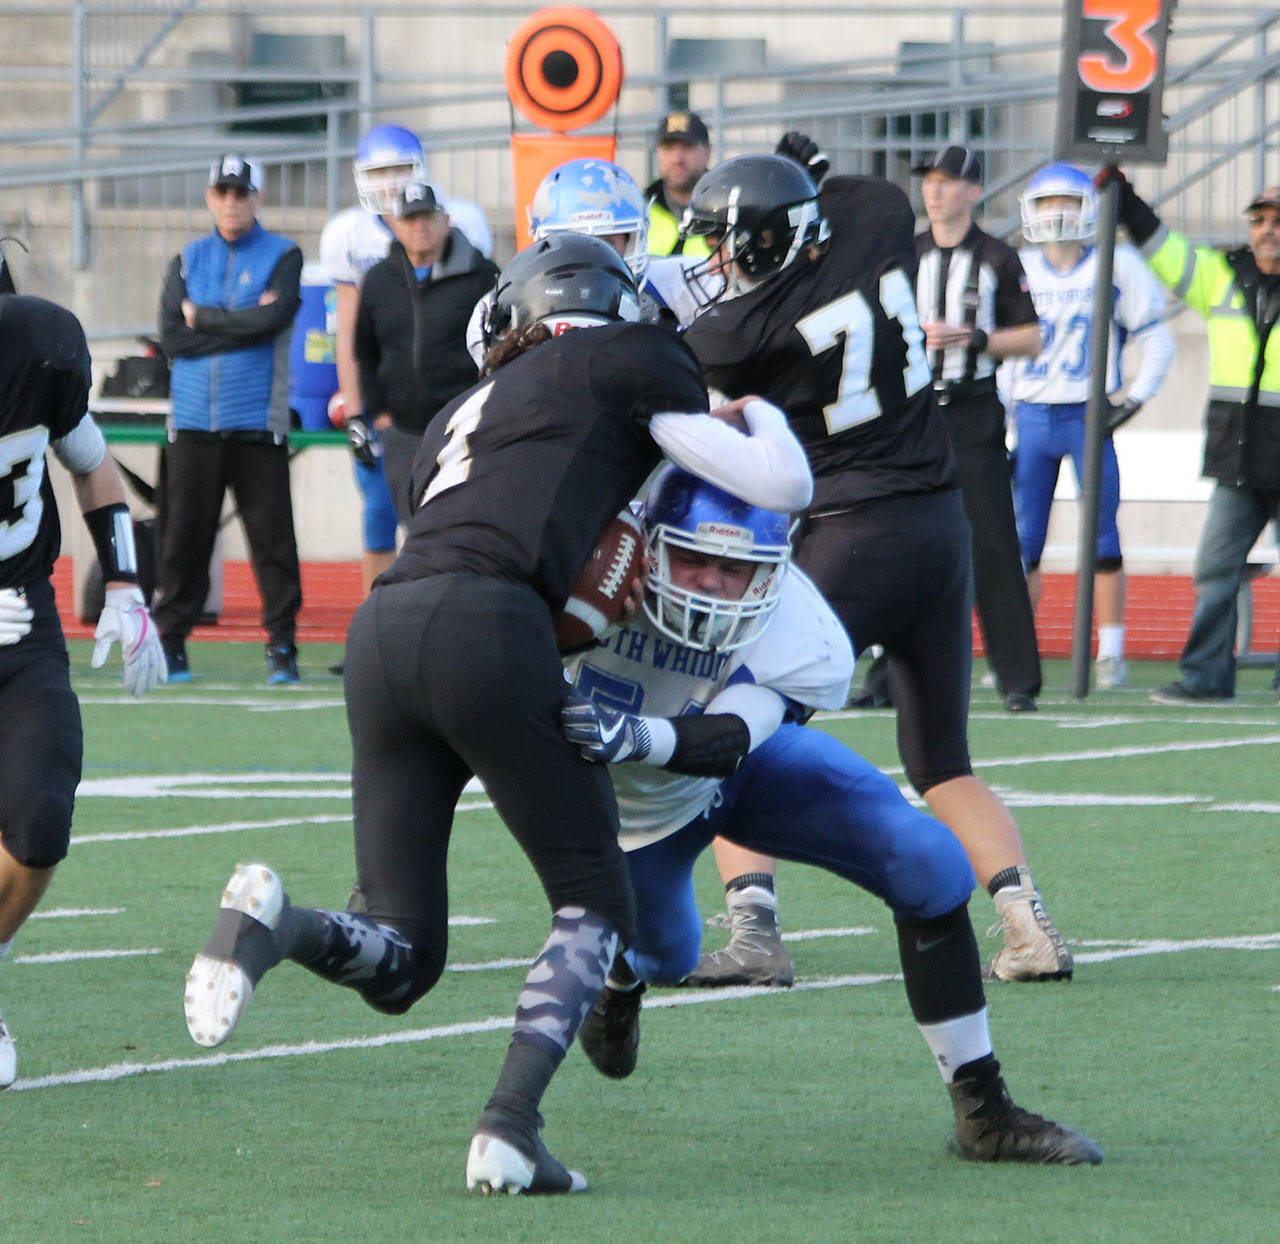 Wyatt De Mers makes a tackle in last year’s playoff game with Meridian. De Mers, a two-way, first-team all-league selection, returns this year to lead the Falcons. (Photo by Jim Waller/South Whidbey Record)